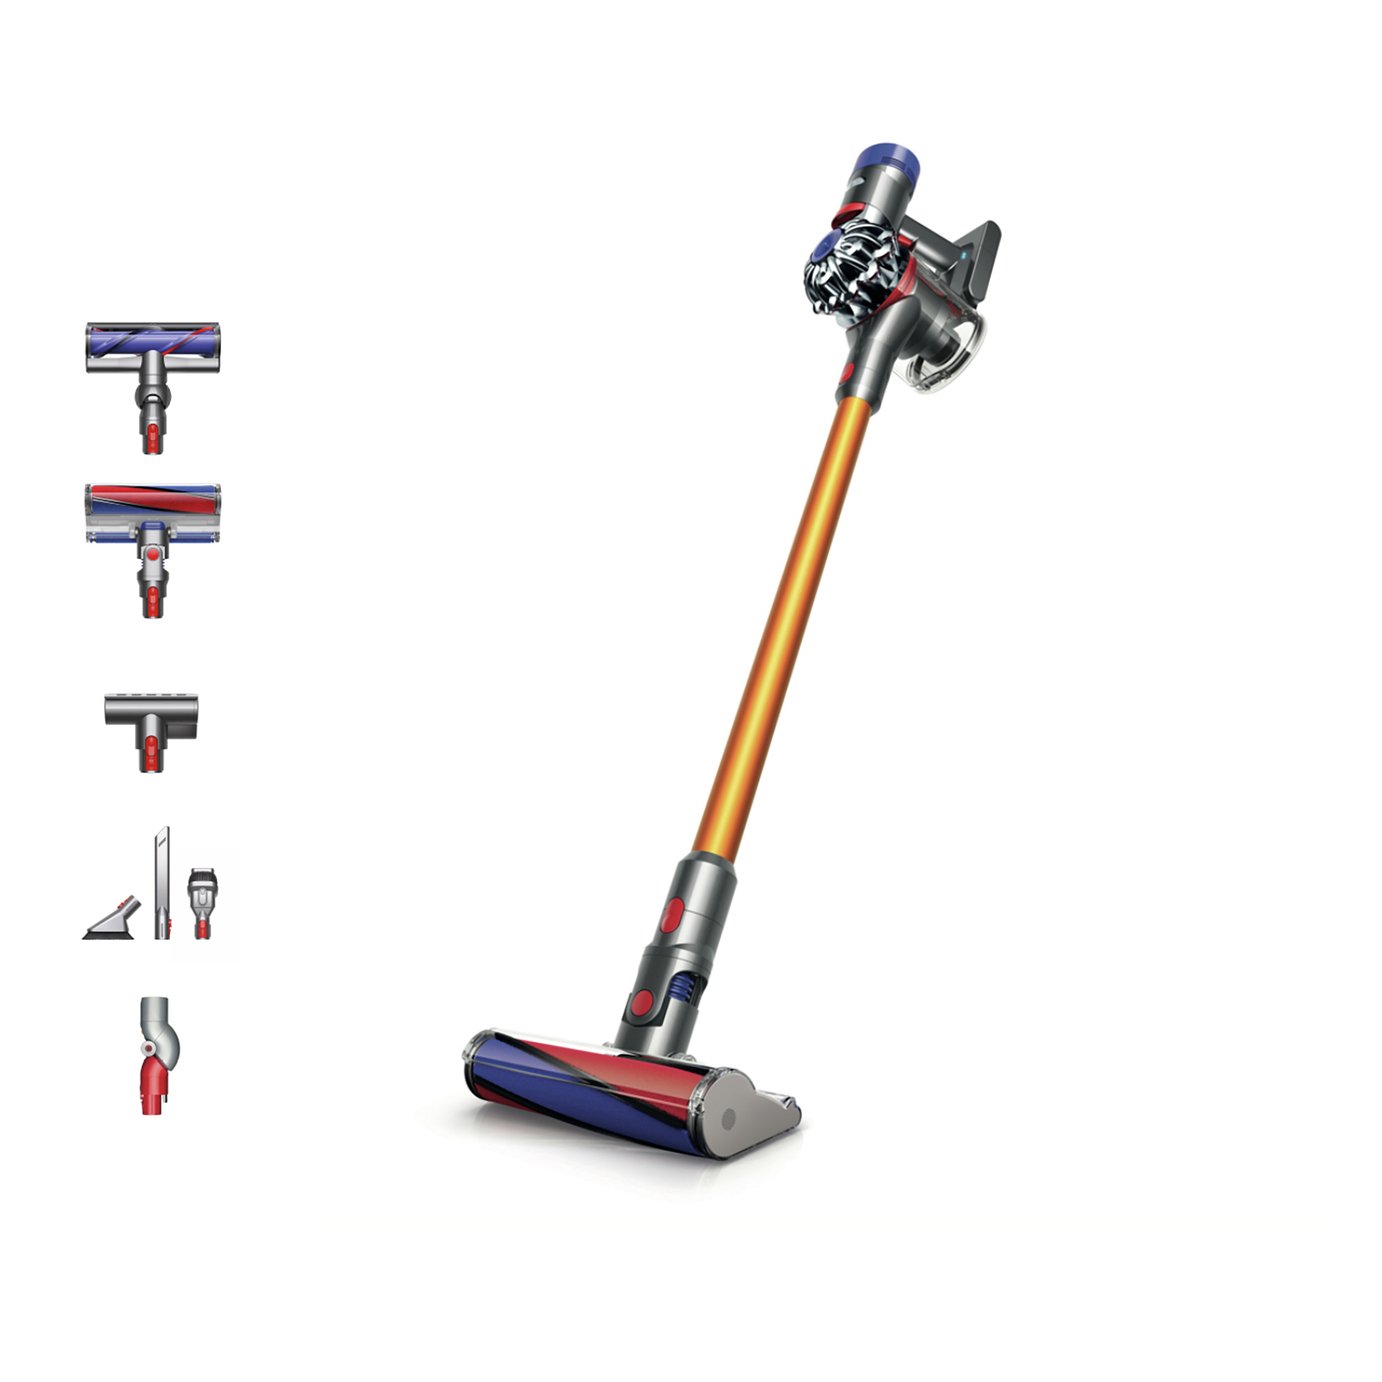 Dyson V7 Absolute Cordless Vacuum Cleaner Review